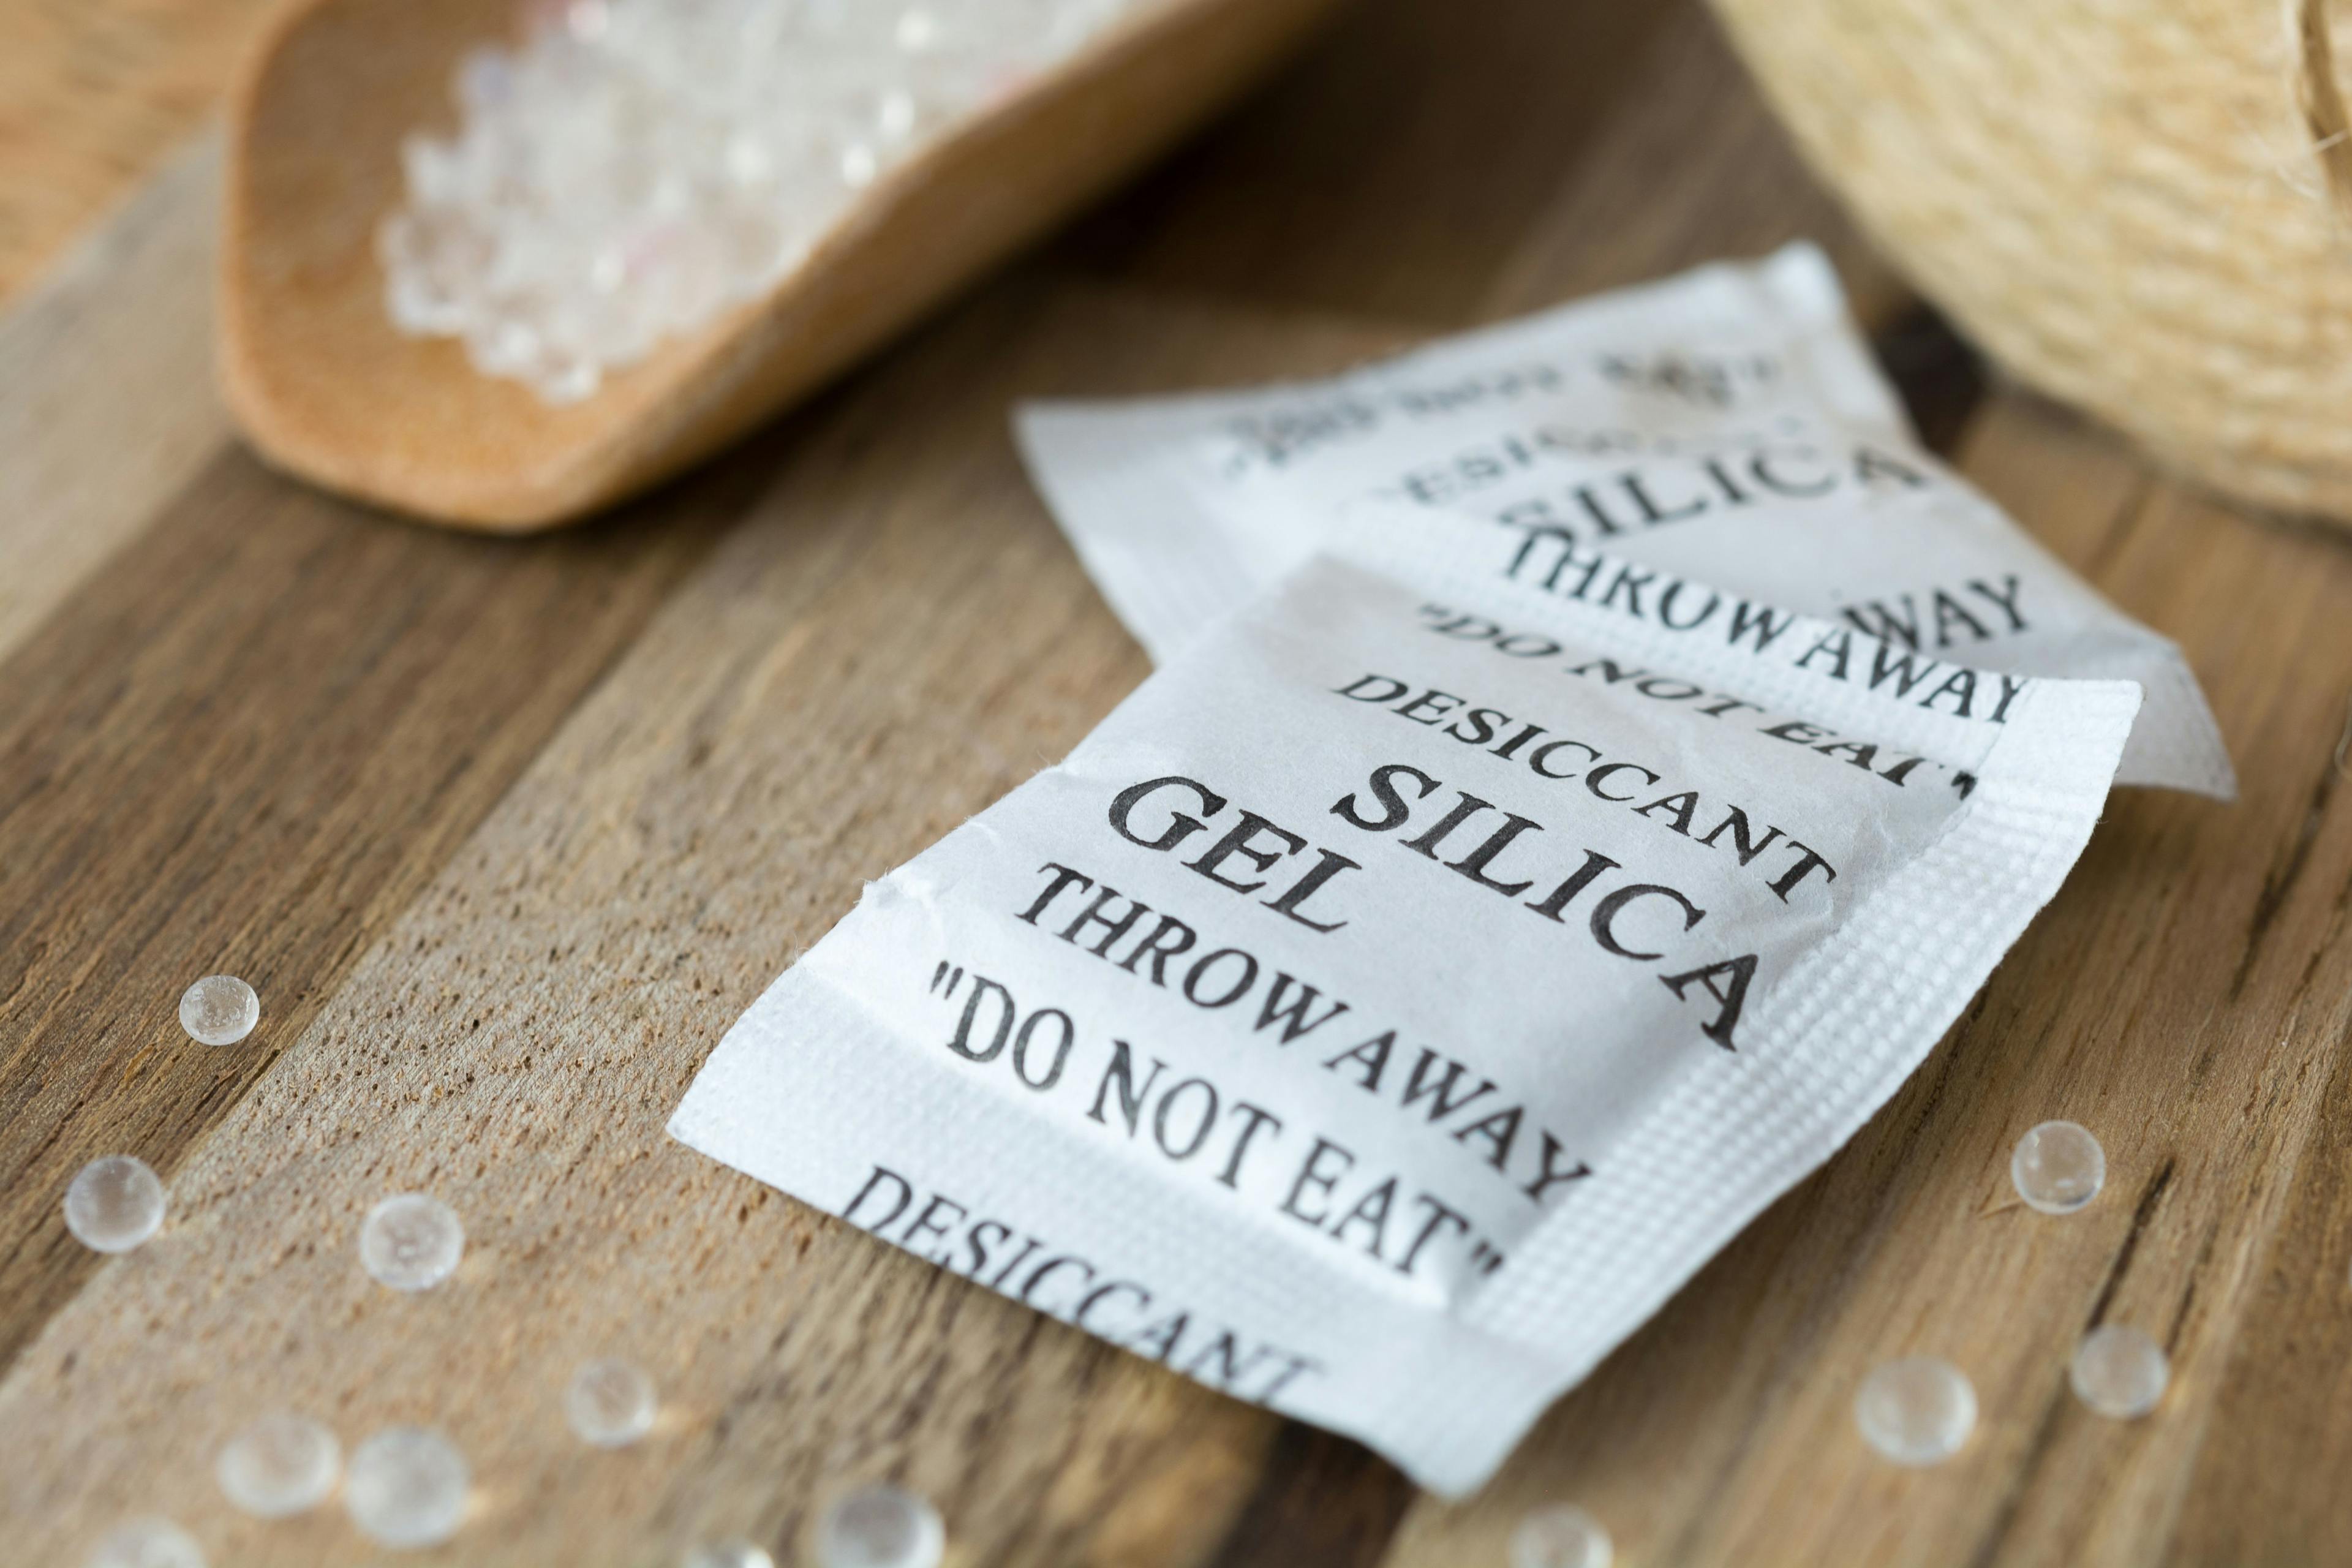 Desiccant or silica gel in white paper packaging and spread on the wooden background. | Image Credit: © mahnoionline - stock.adobe.com